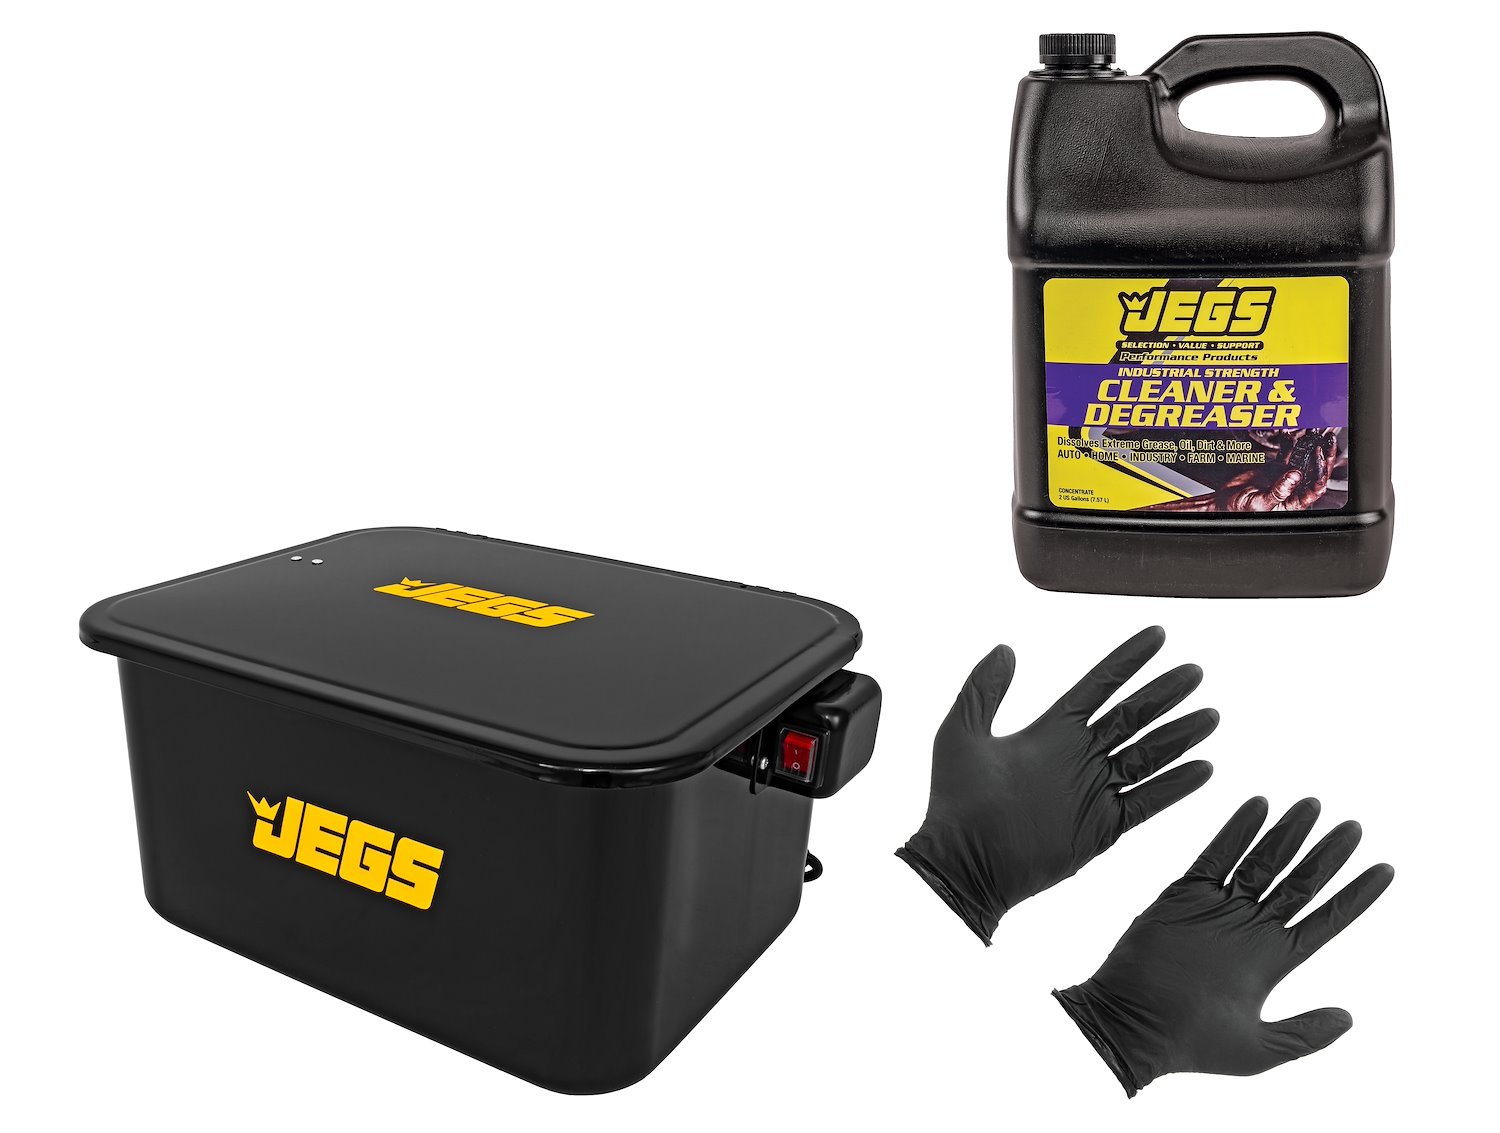 Portable Parts Washer Kit with 1 Two Gallon Bottle of Cleaner/Degreaser & X-Large Gloves [5-Gallon Tank]